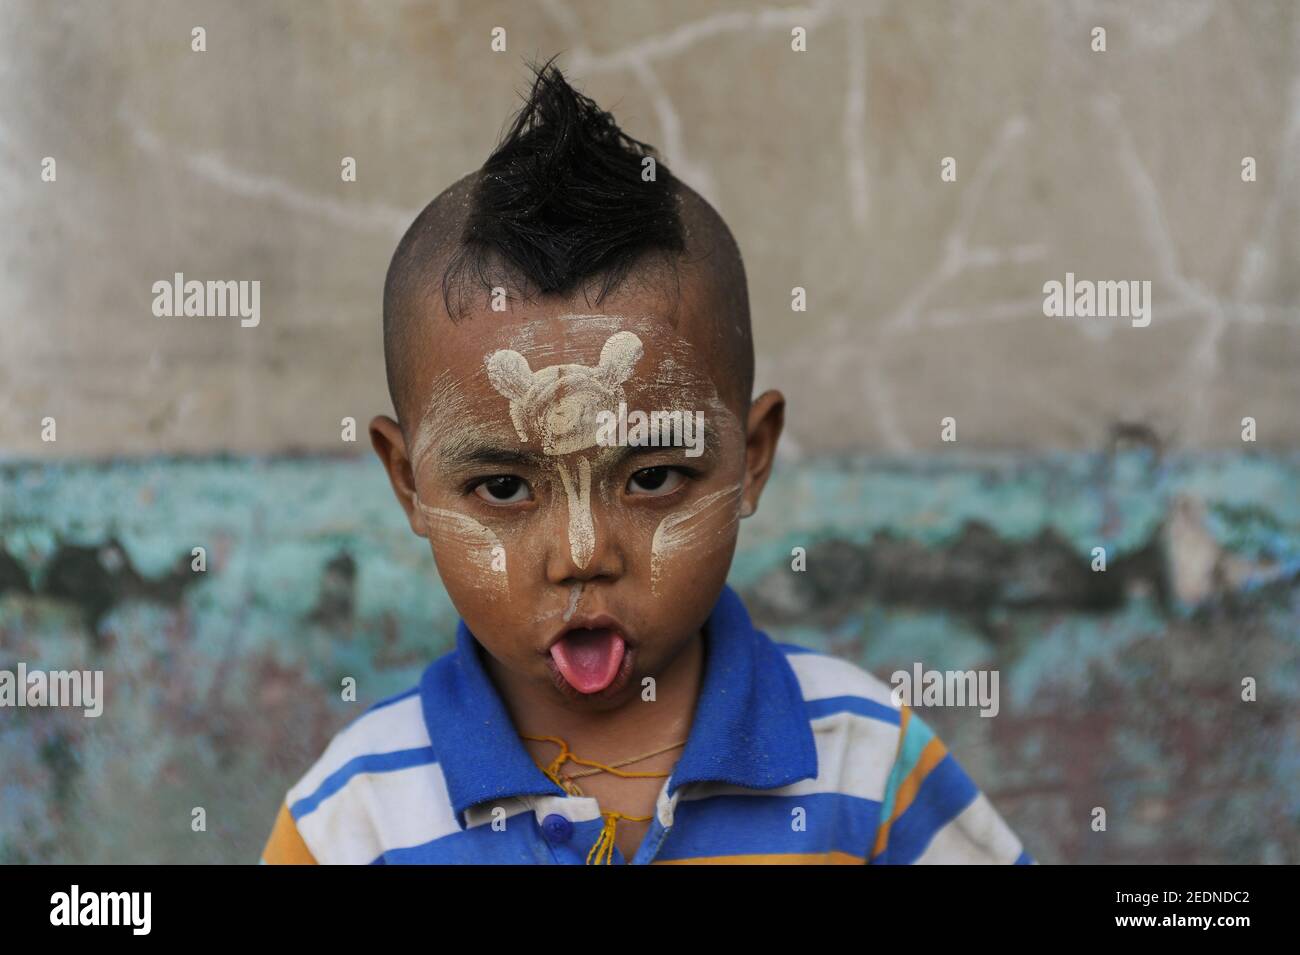 15.01.2014, Yangon, , Myanmar - Portrait of a little boy sticking out his tongue and his face smeared with thanaka paste. Thanaka is a yellowish-white Stock Photo